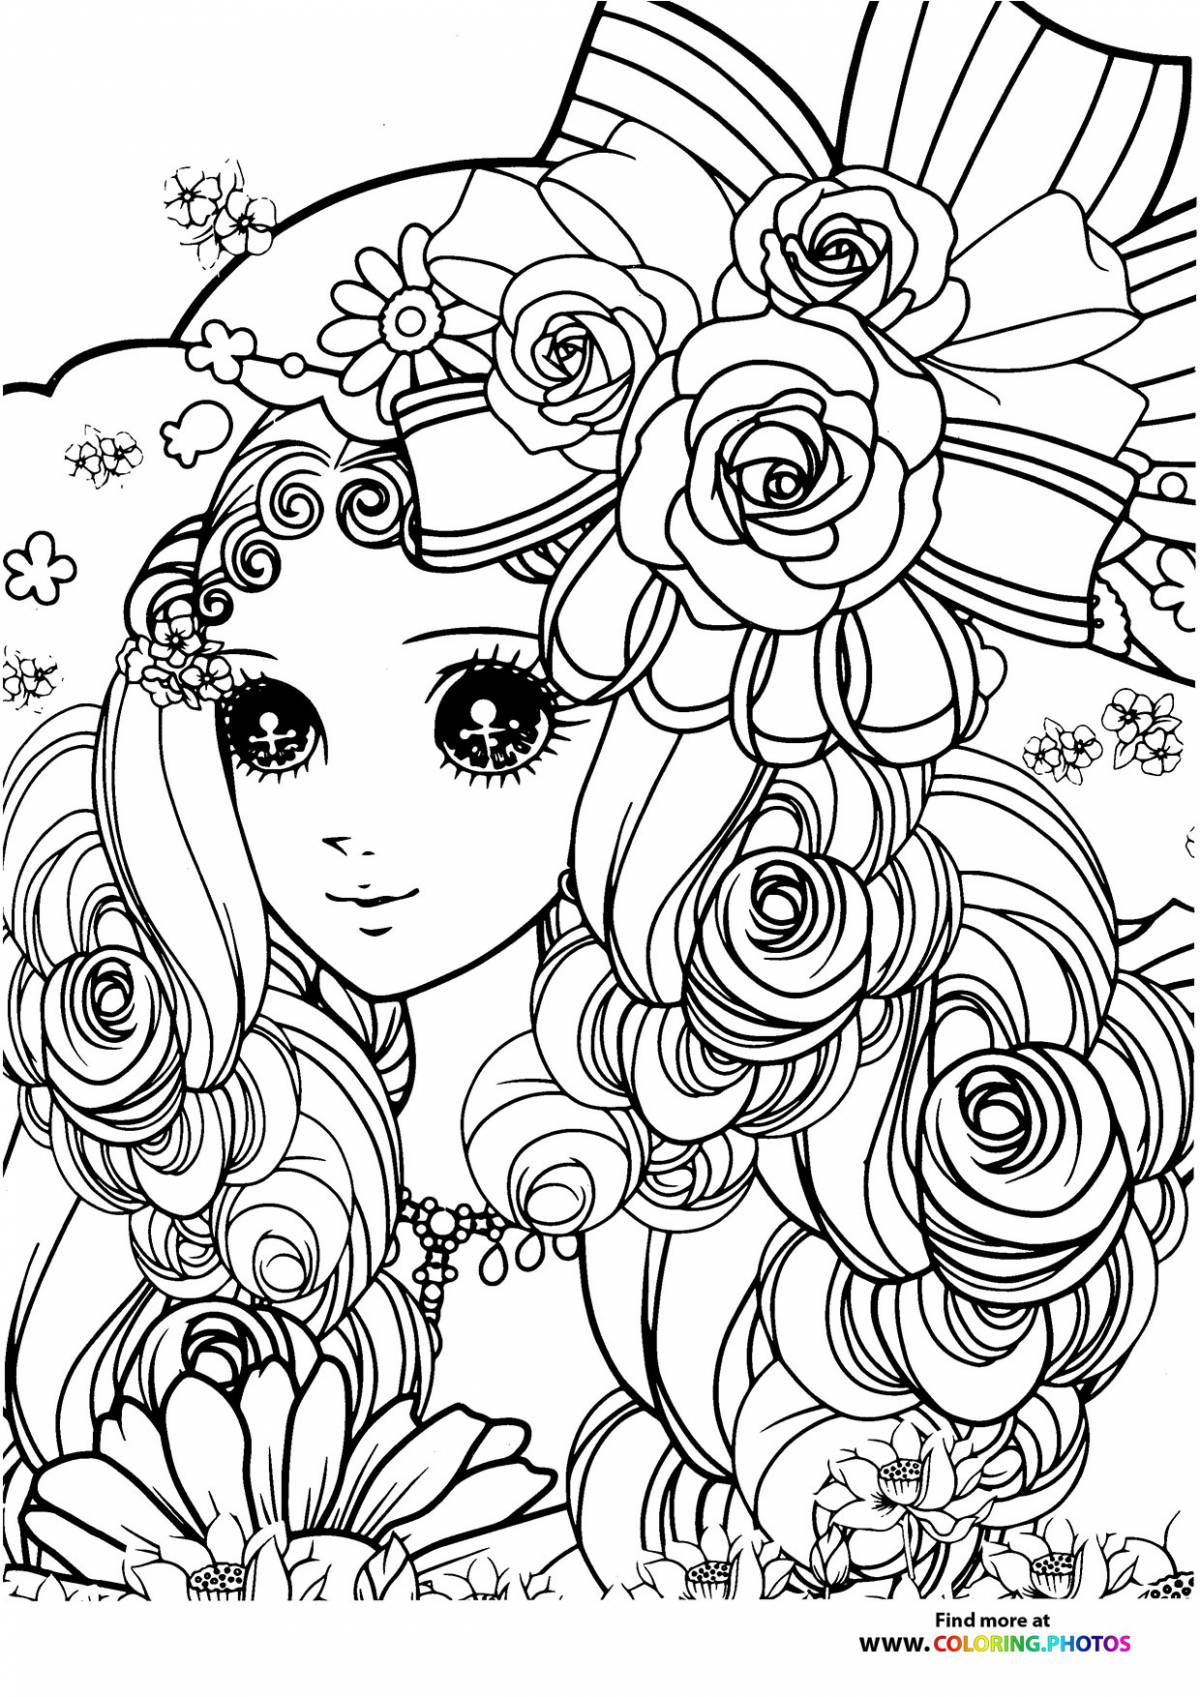 Royal coloring for girls 19 years old